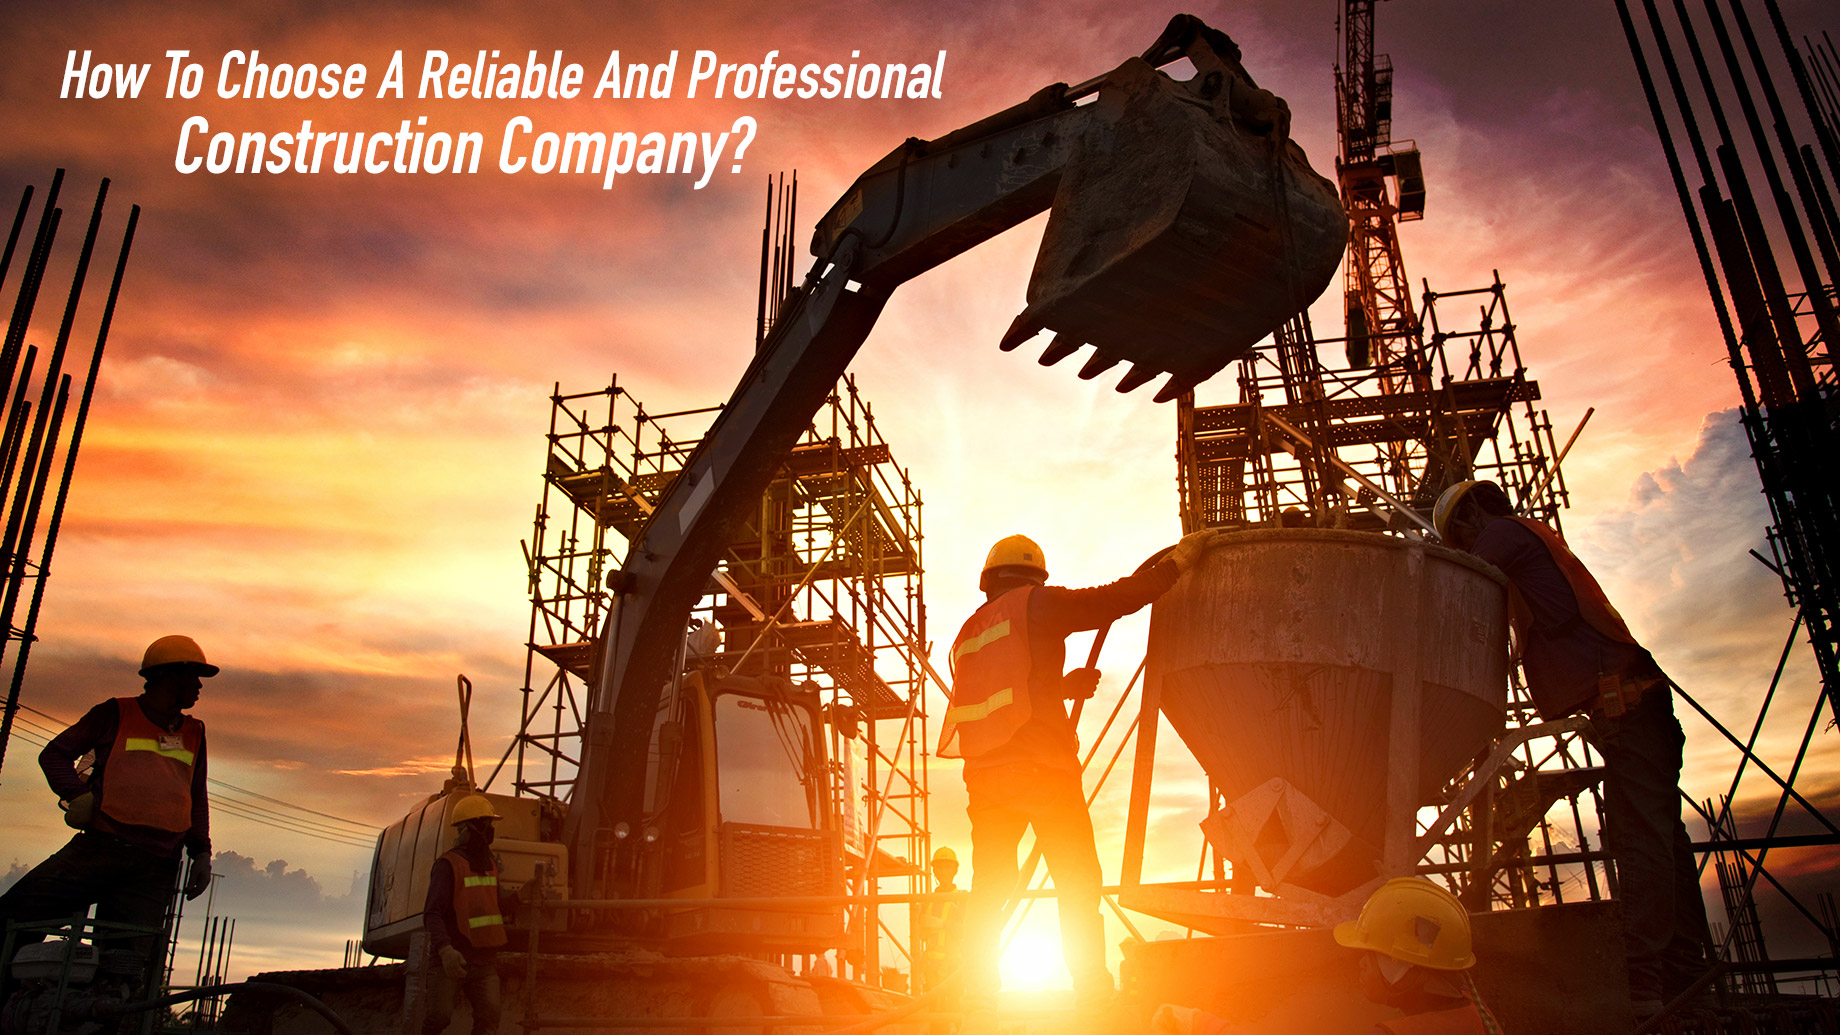 How To Choose A Reliable And Professional Construction Company?